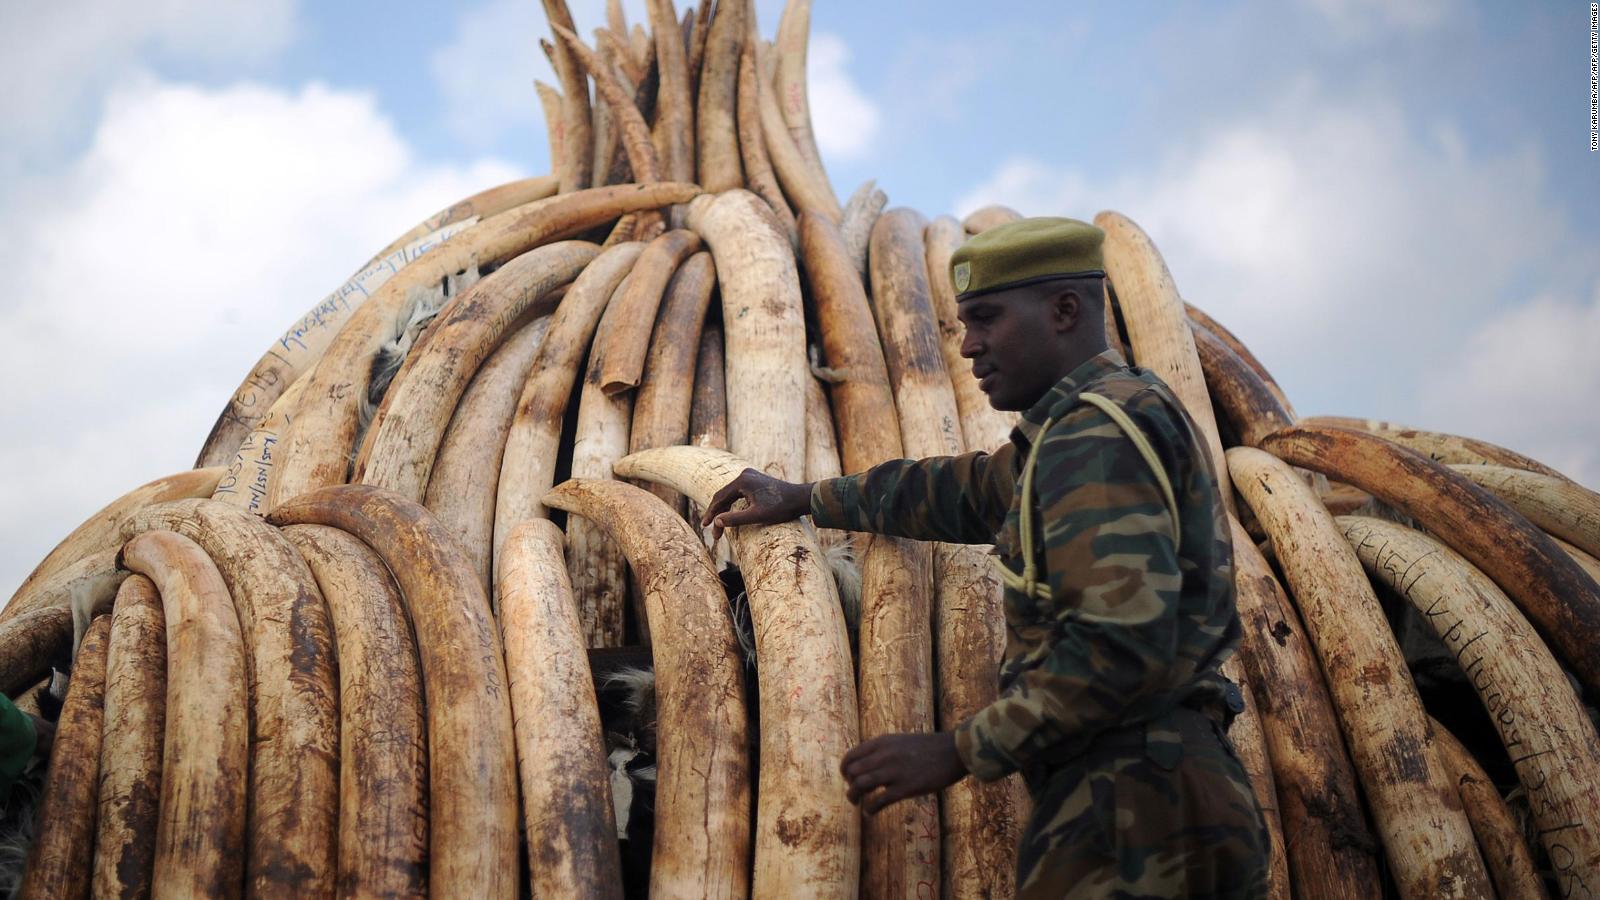 African Elephant Poaching For Ivory Has Declined But Study Warns They